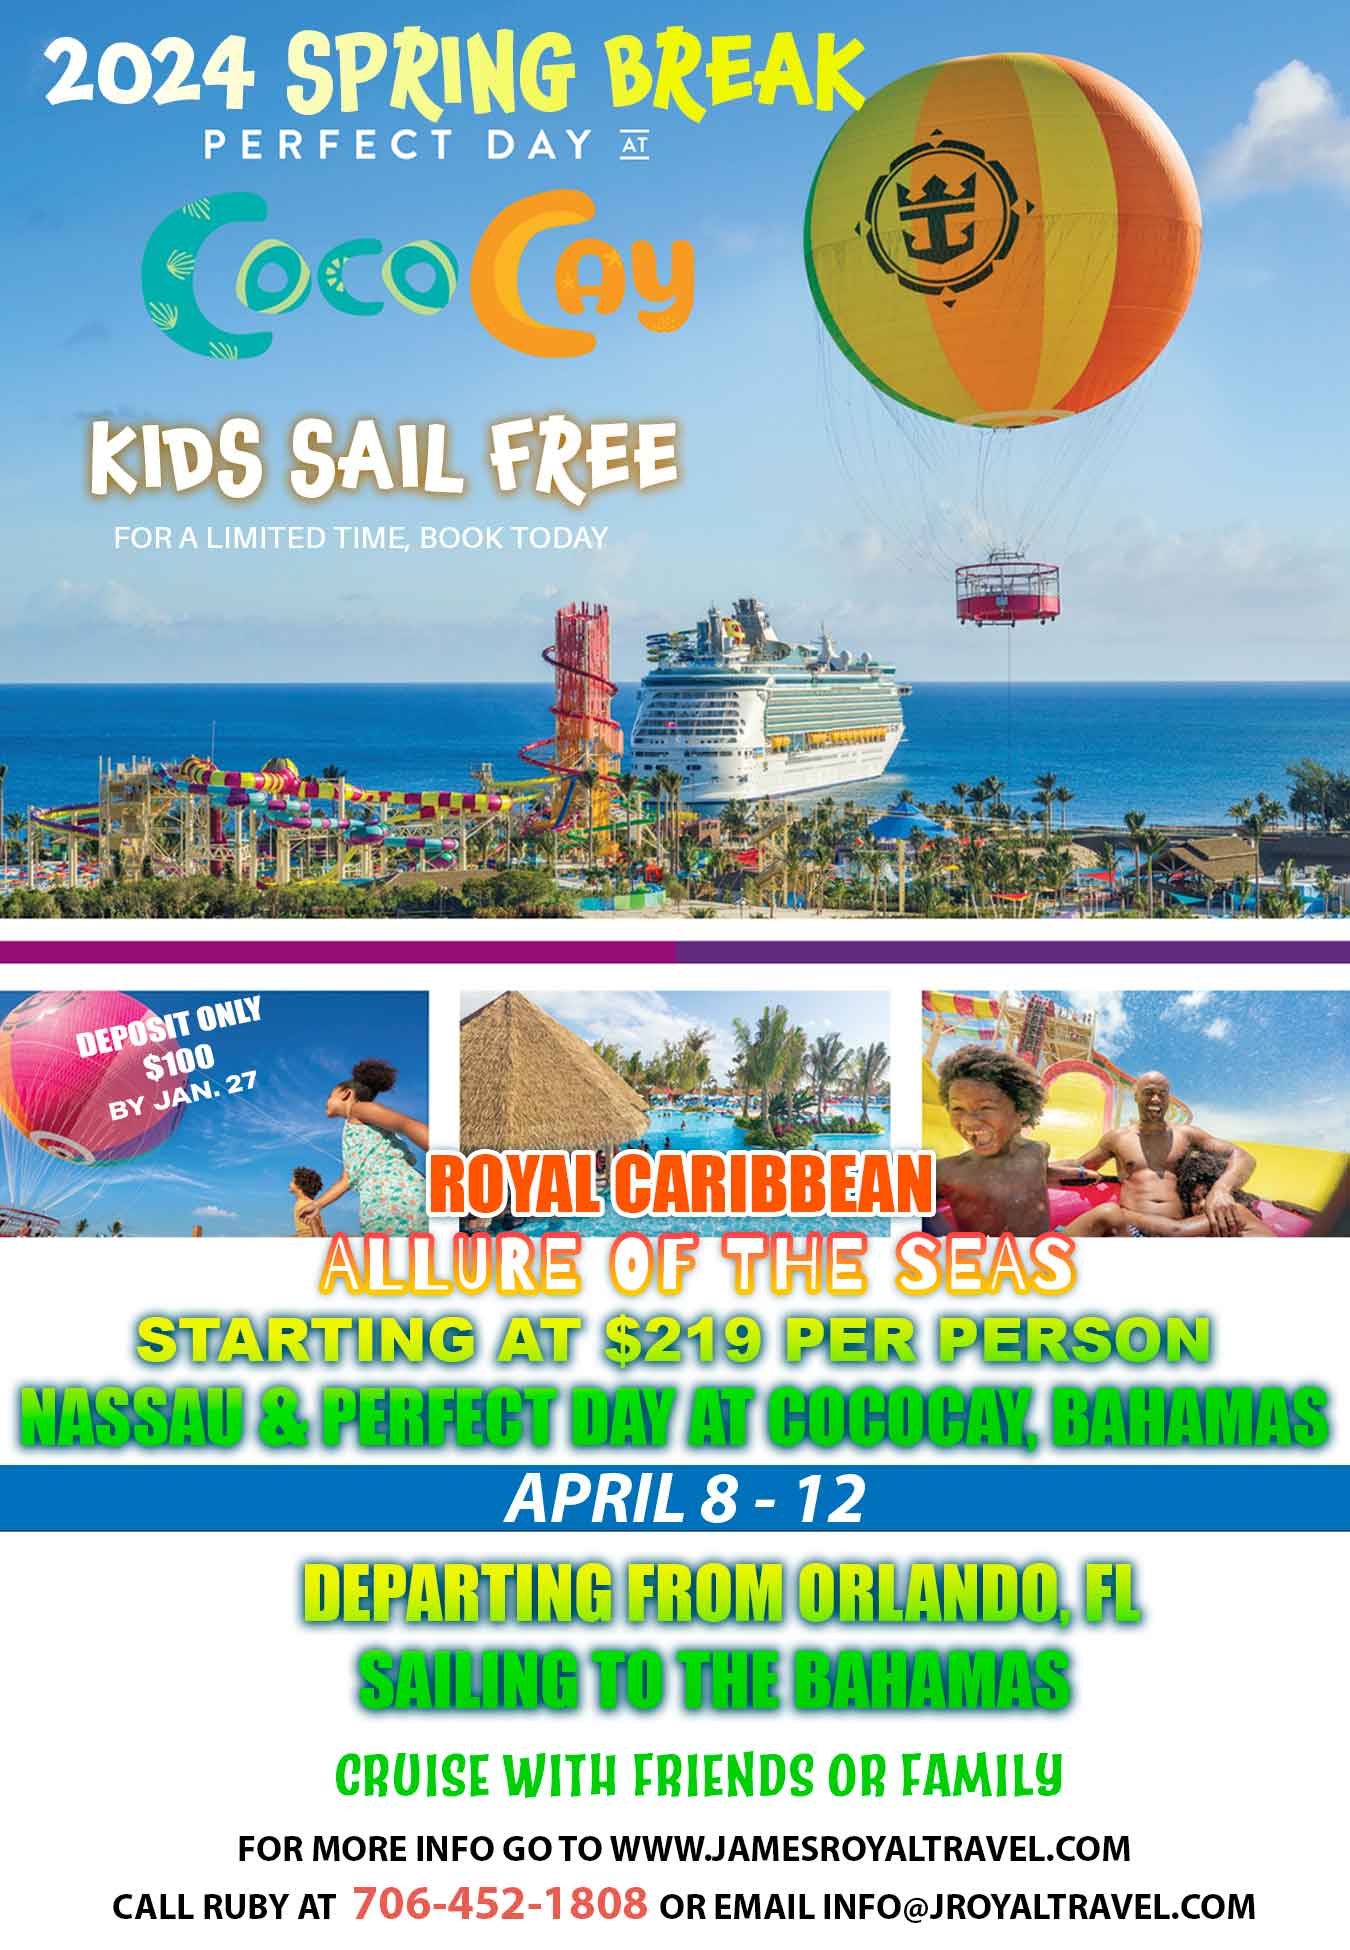 Royal Caribbean Allure of the Seas Spring Break Cruise to the Bahamas